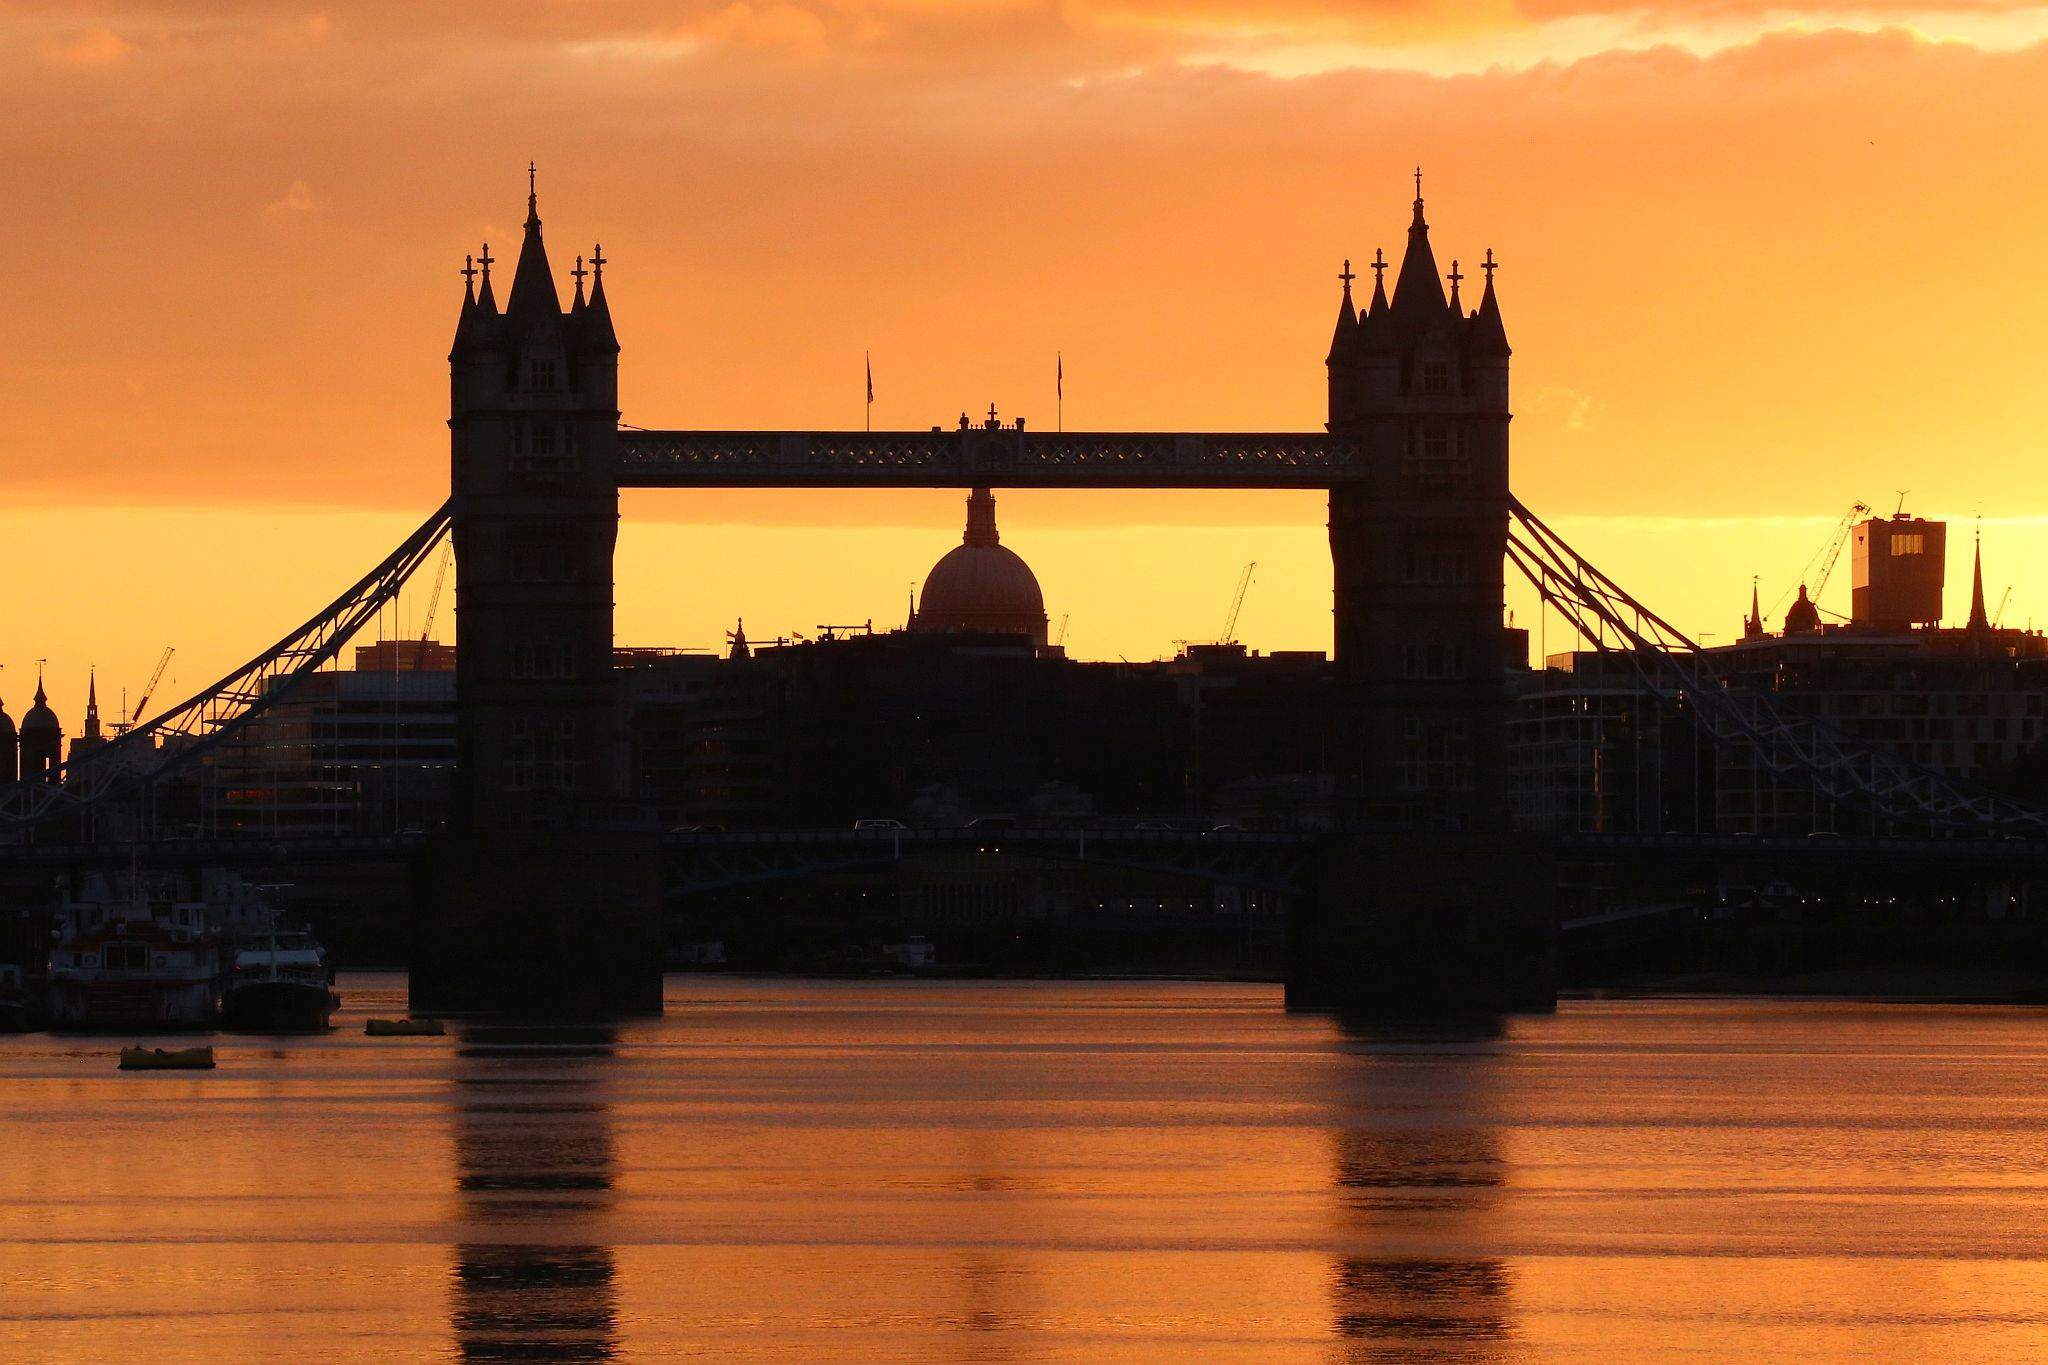 Tower Bridge, on the River Thames in London, at sunset. 19-Jun-2020.